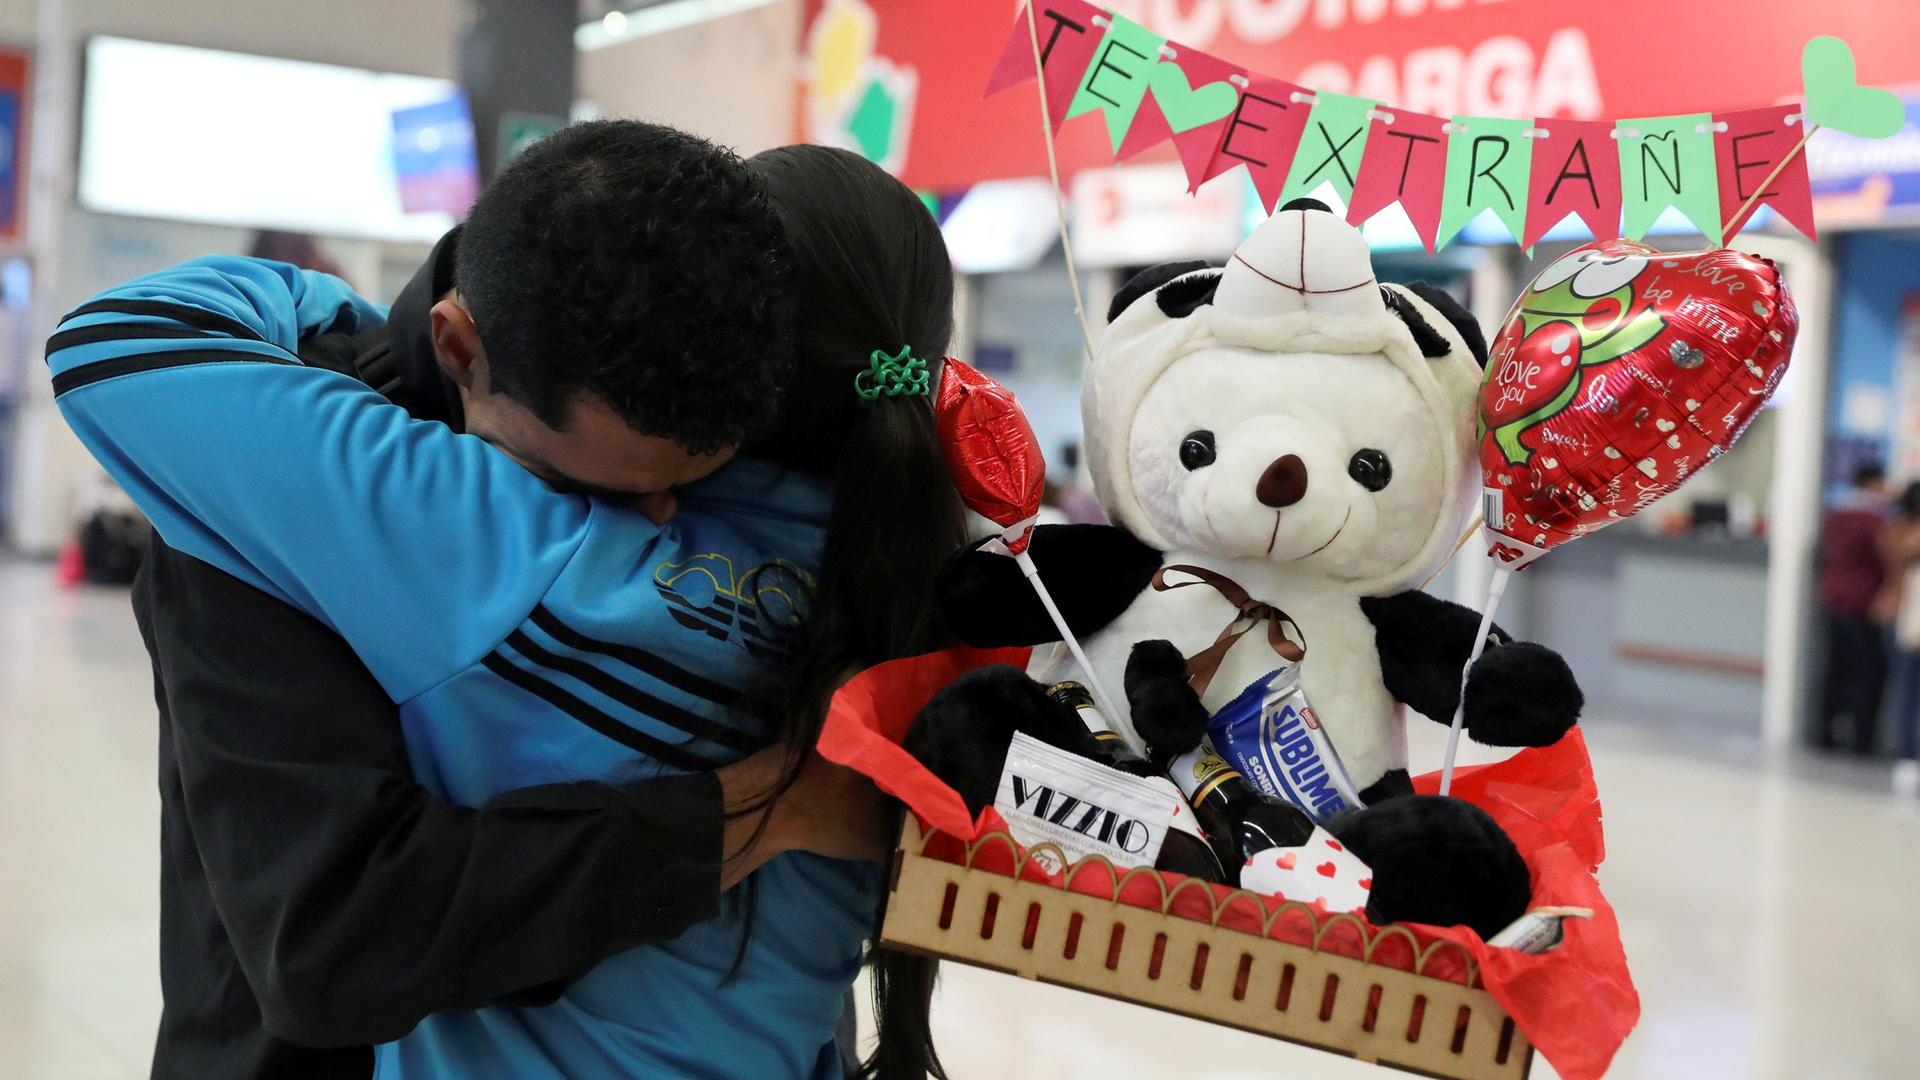 Two people embrace in a bus station. One of them holds a greeting balloon, candy and a stuffed animal.